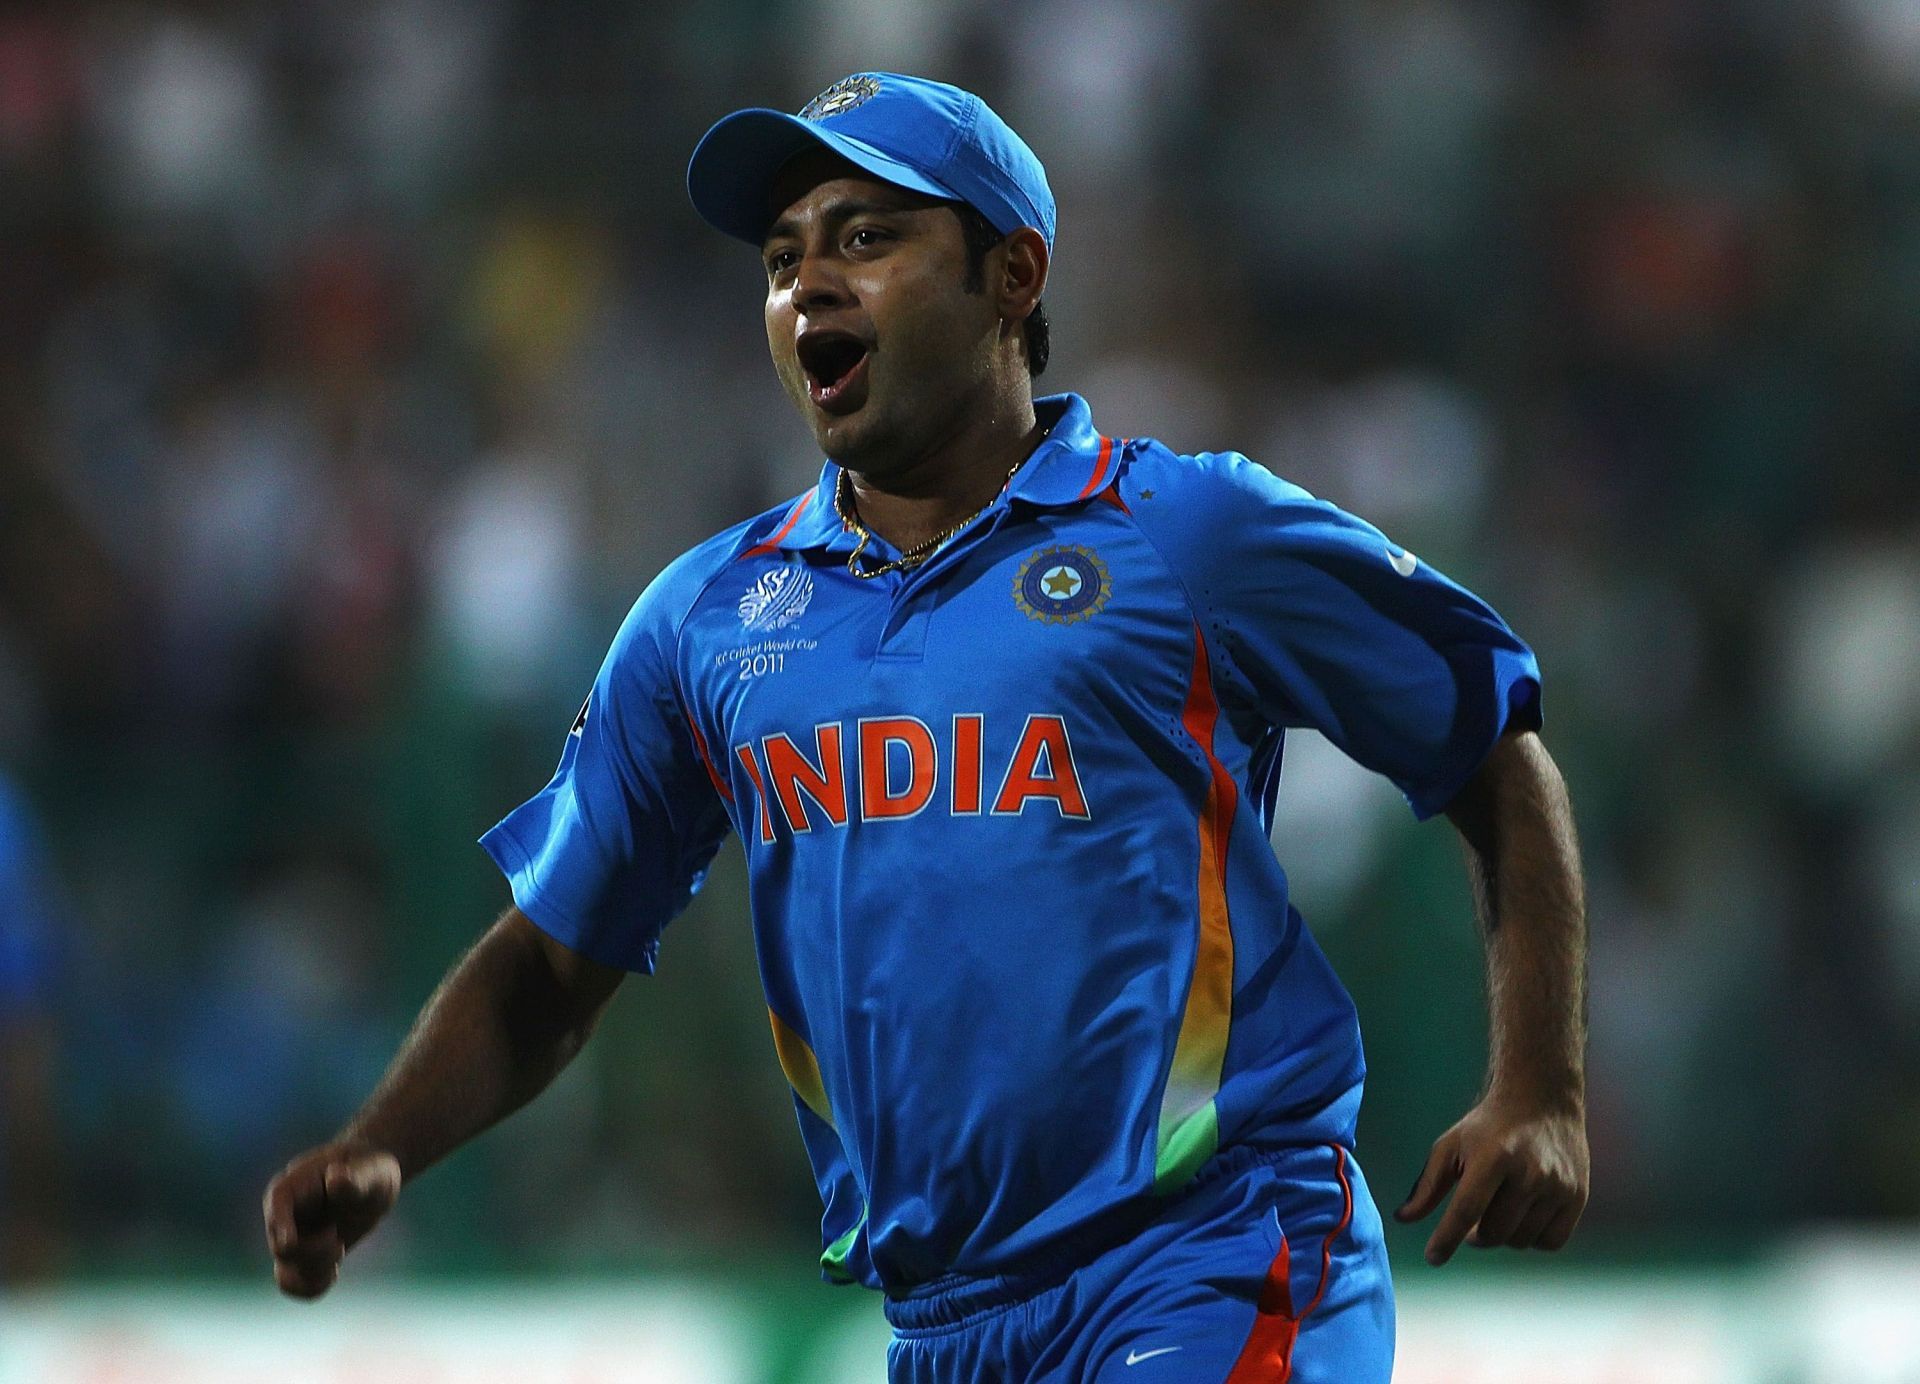 Piyush Chawla played his first T20I in ICC T20 World Cup 2010